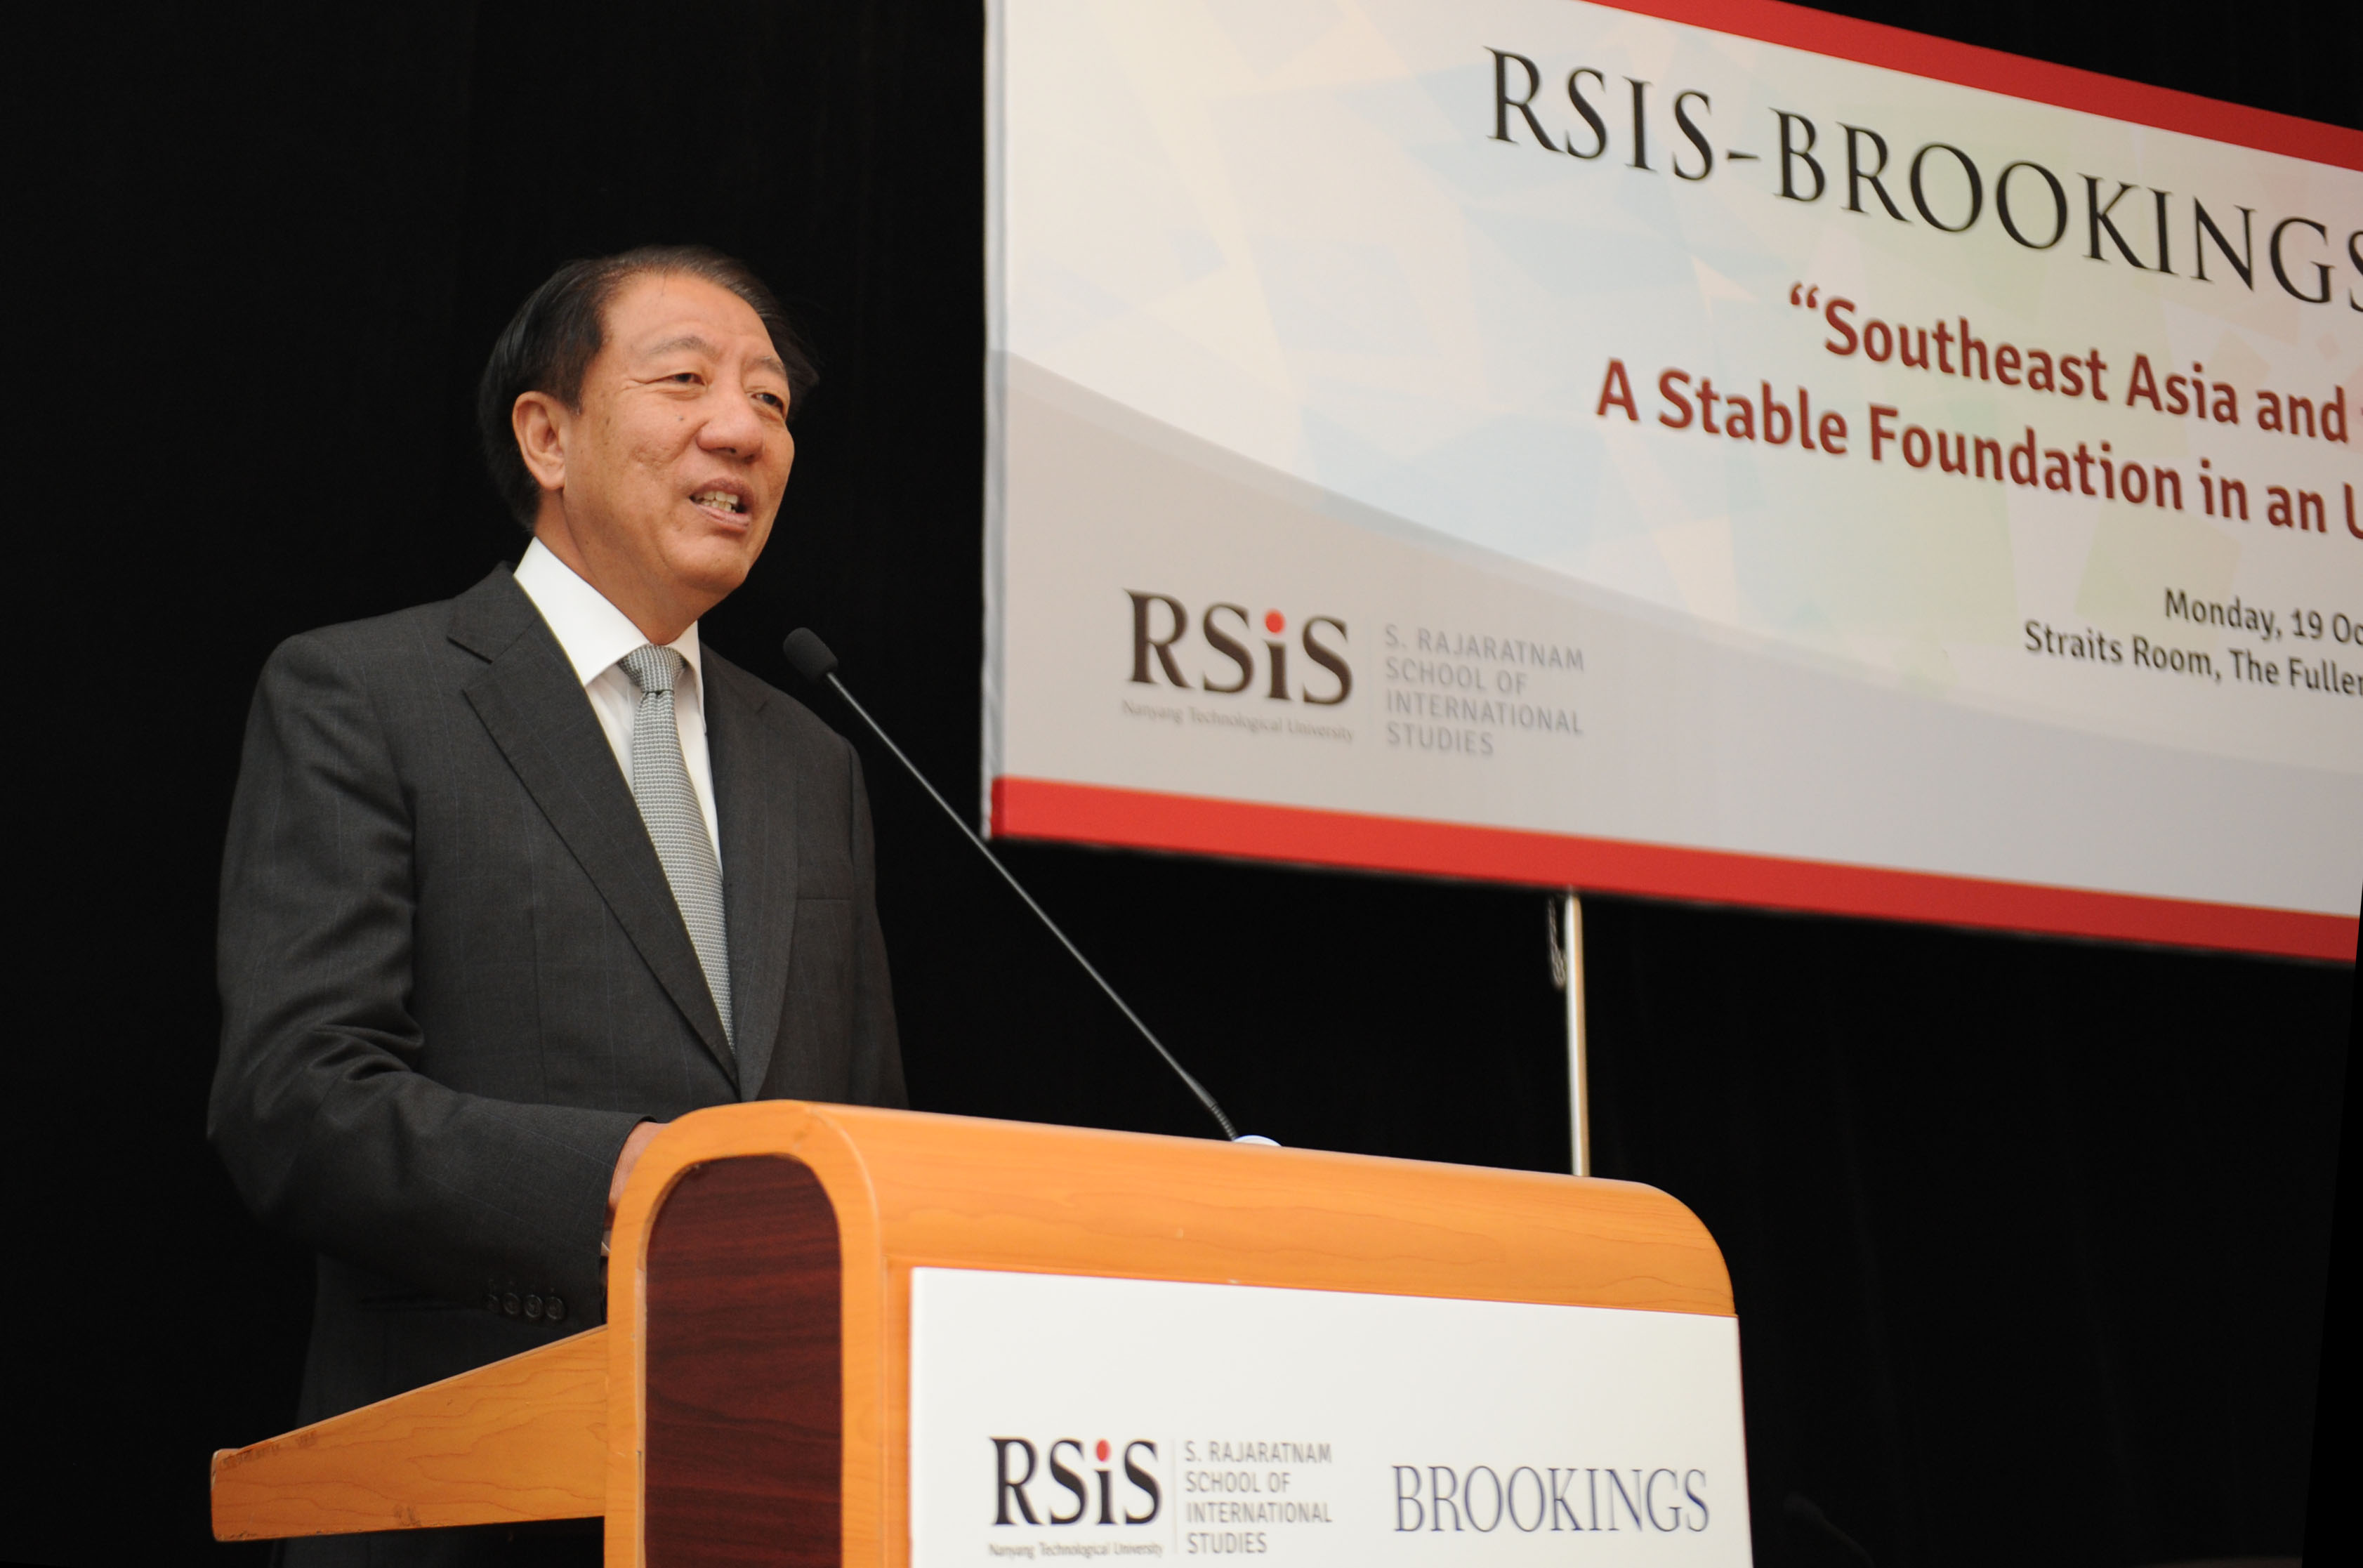 DPM Teo Chee Hean at the RSIS-Brookings Institution Conference on 19 Oct 2015